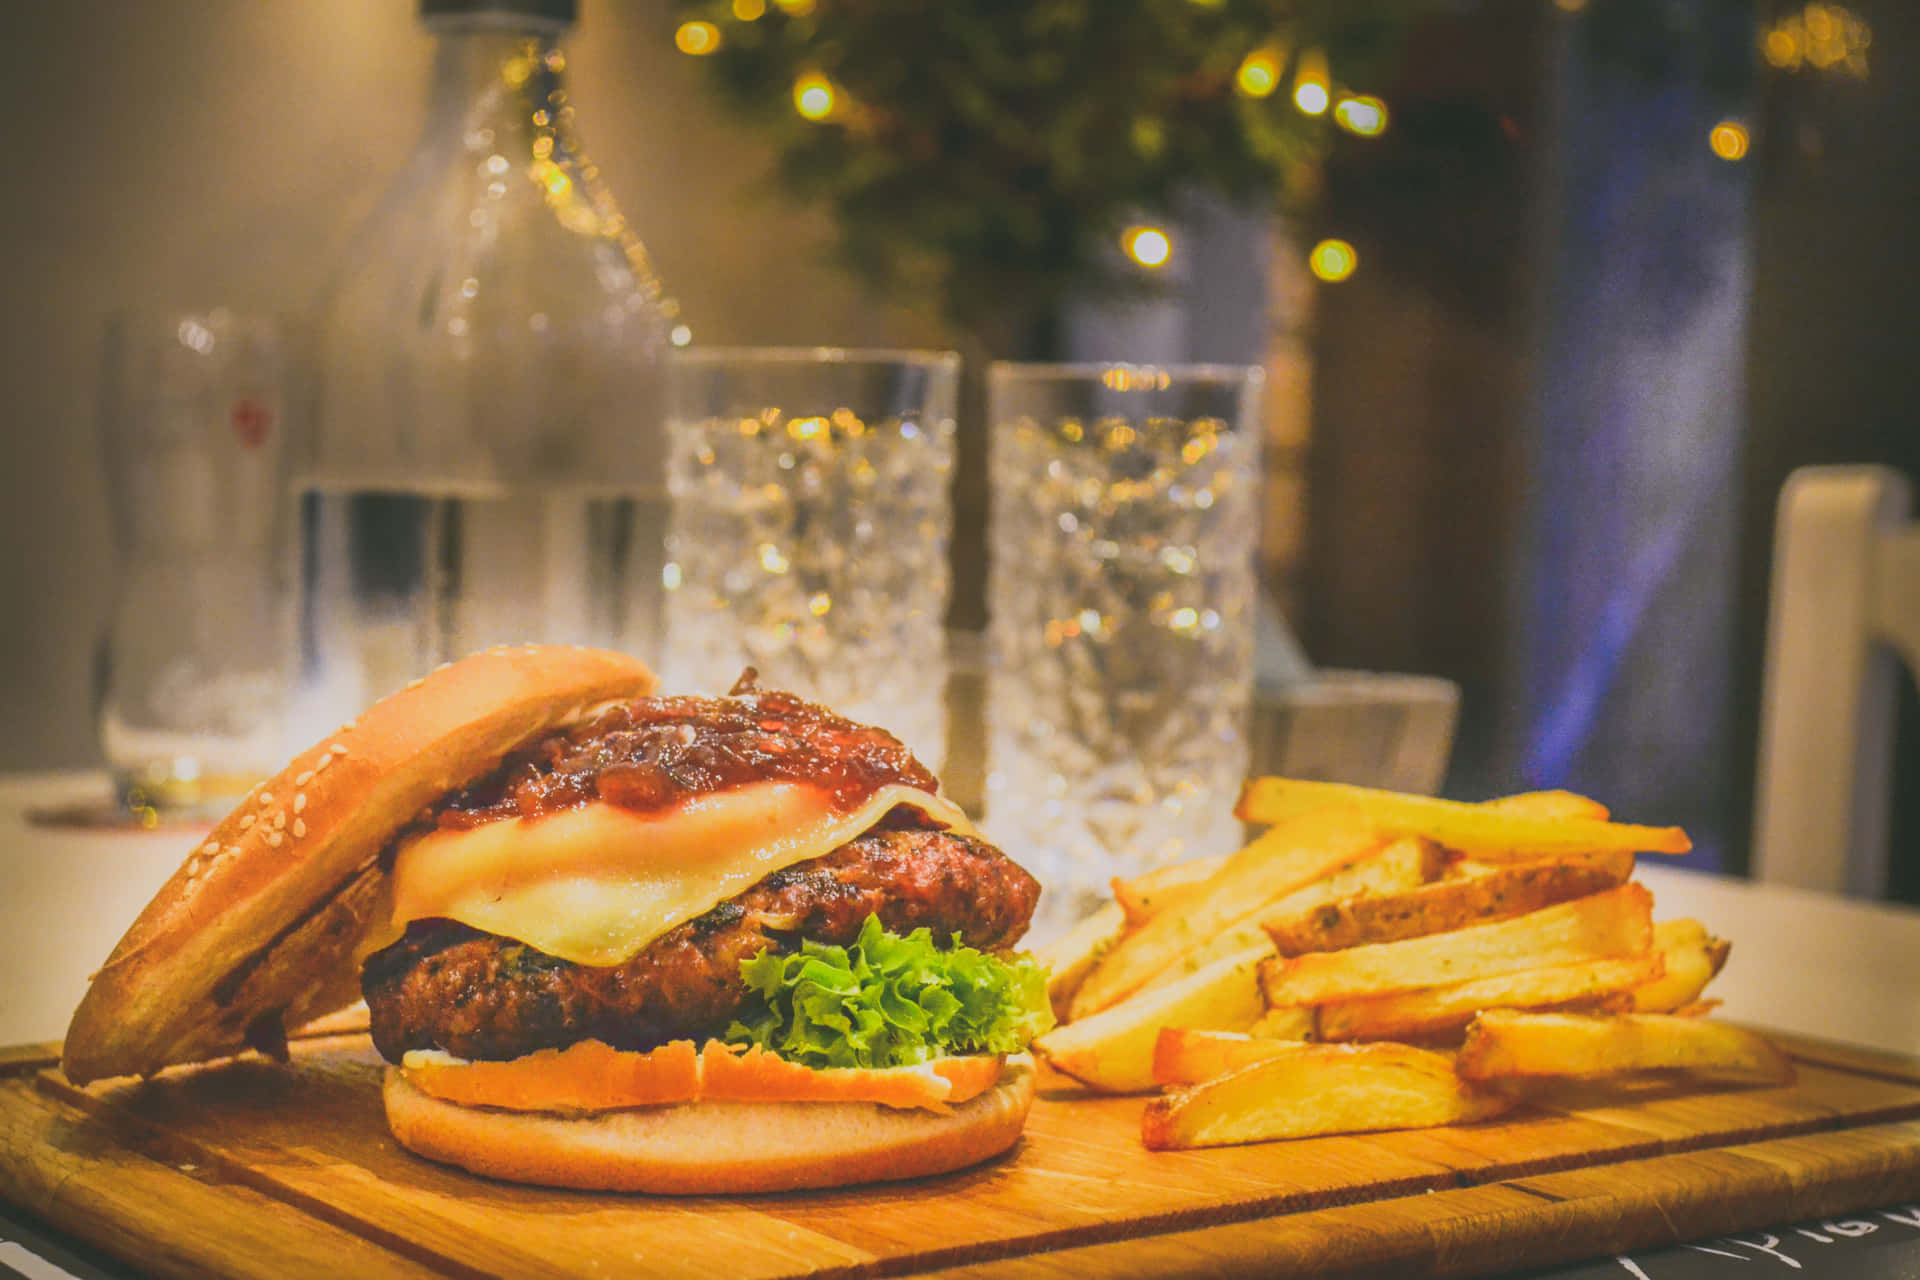 A Burger And Fries On A Wooden Cutting Board